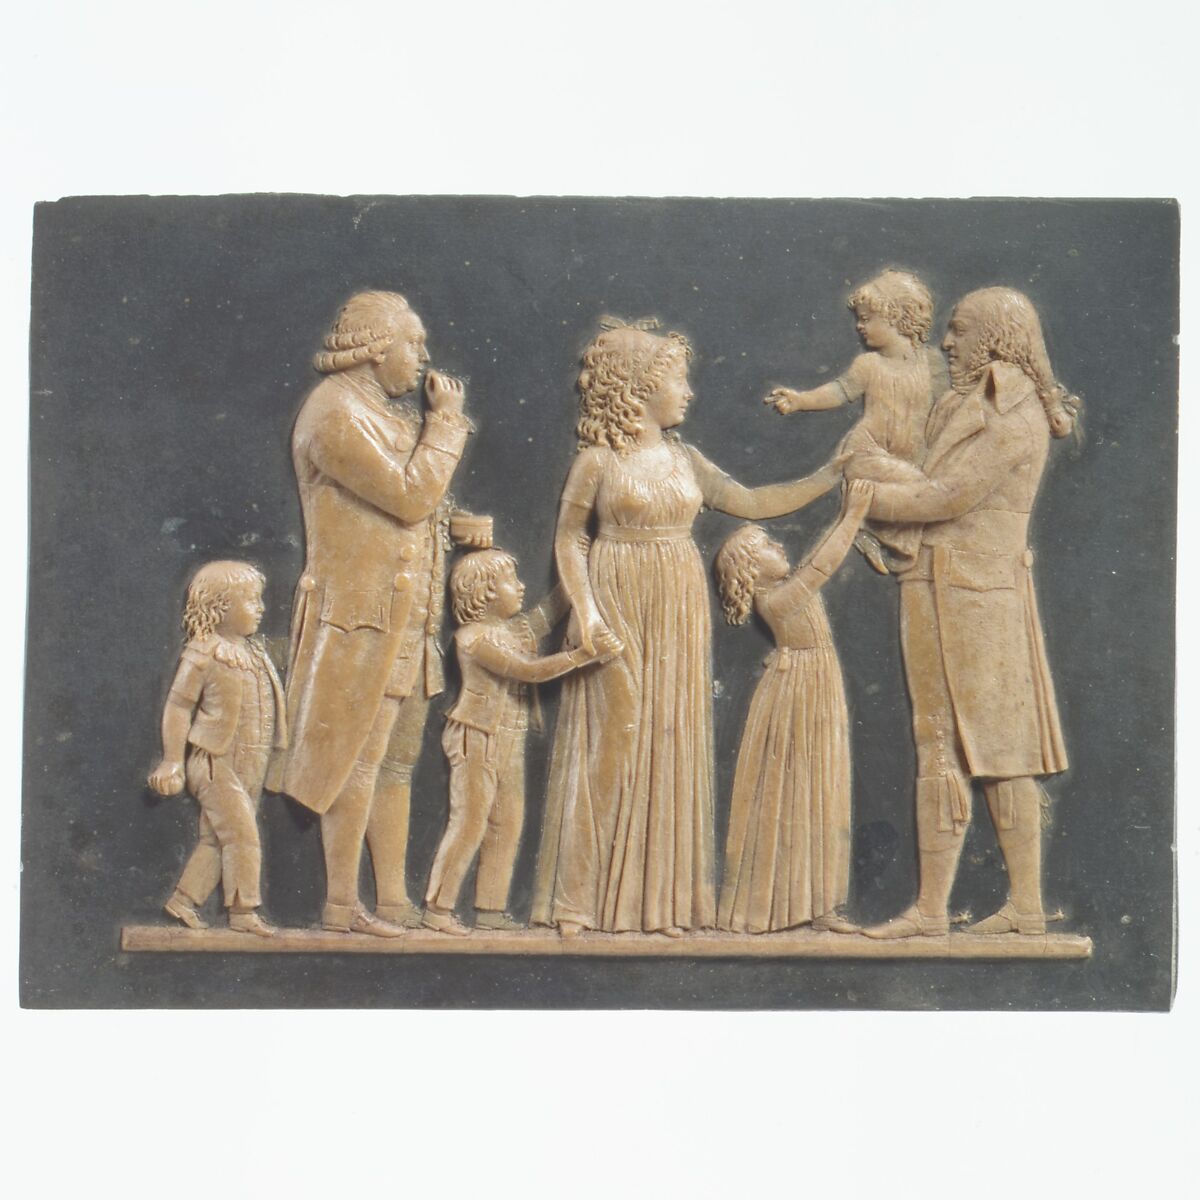 Family group portrait, Jean Martin Renaud (French, Sarreguemines 1746–1821 Paris), Wax on slate, French 